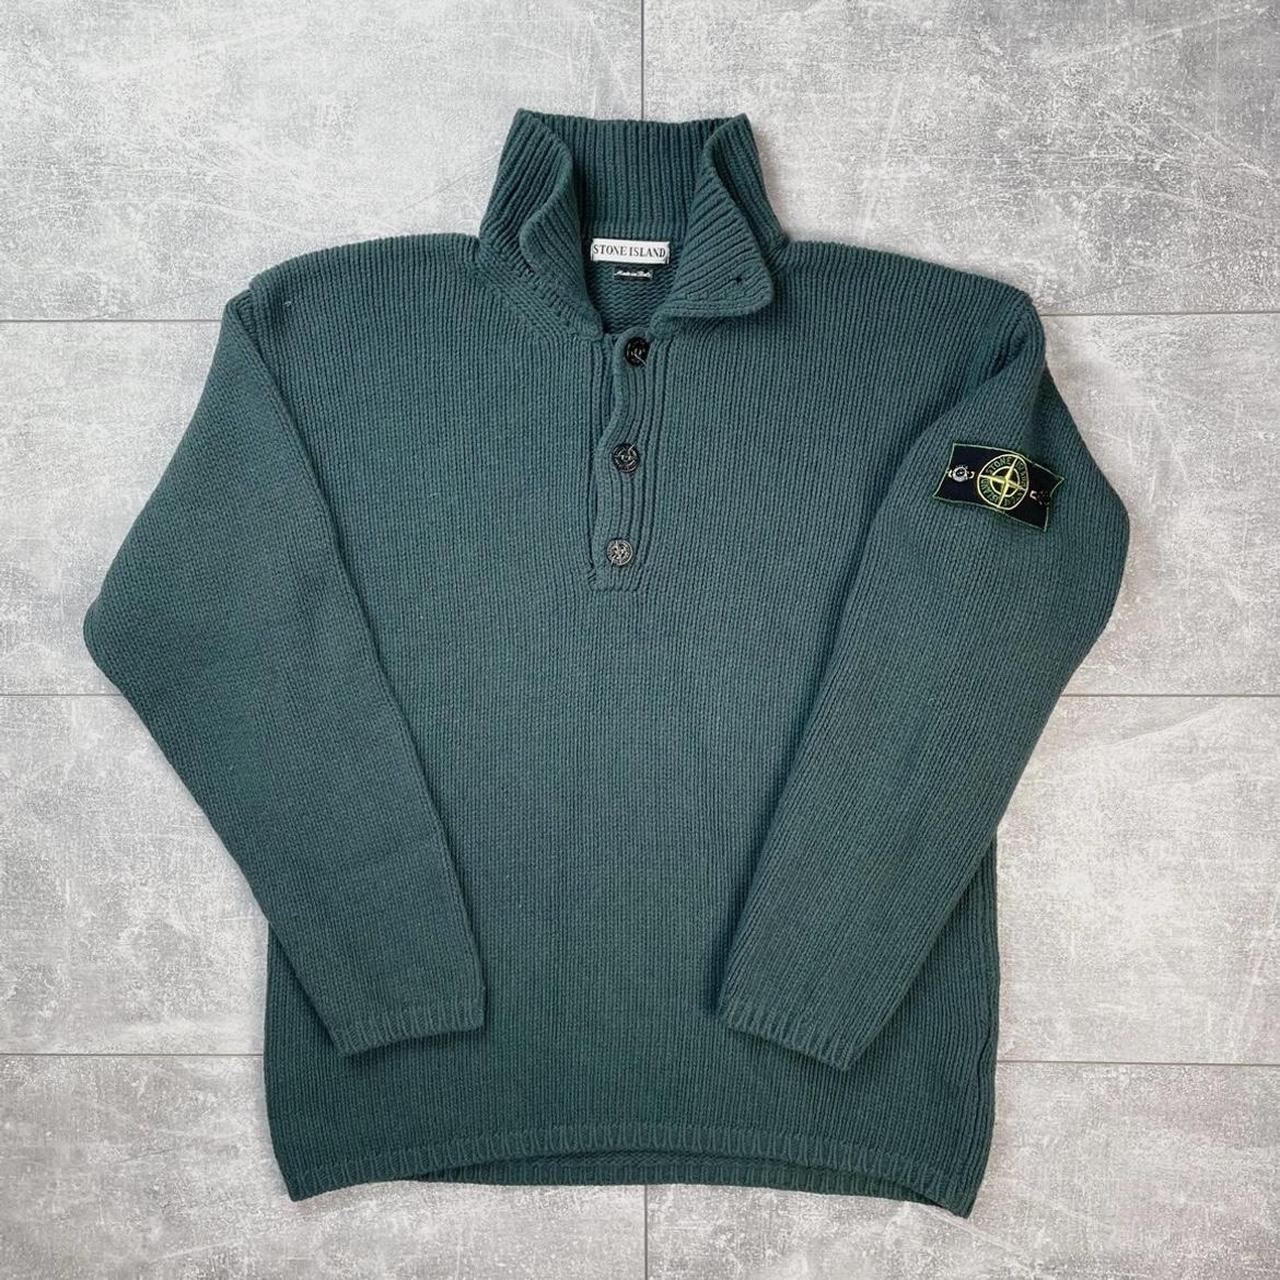 Stone Island Super Rare Vintage Wool Knit Size Large fits Large to XL AW1996